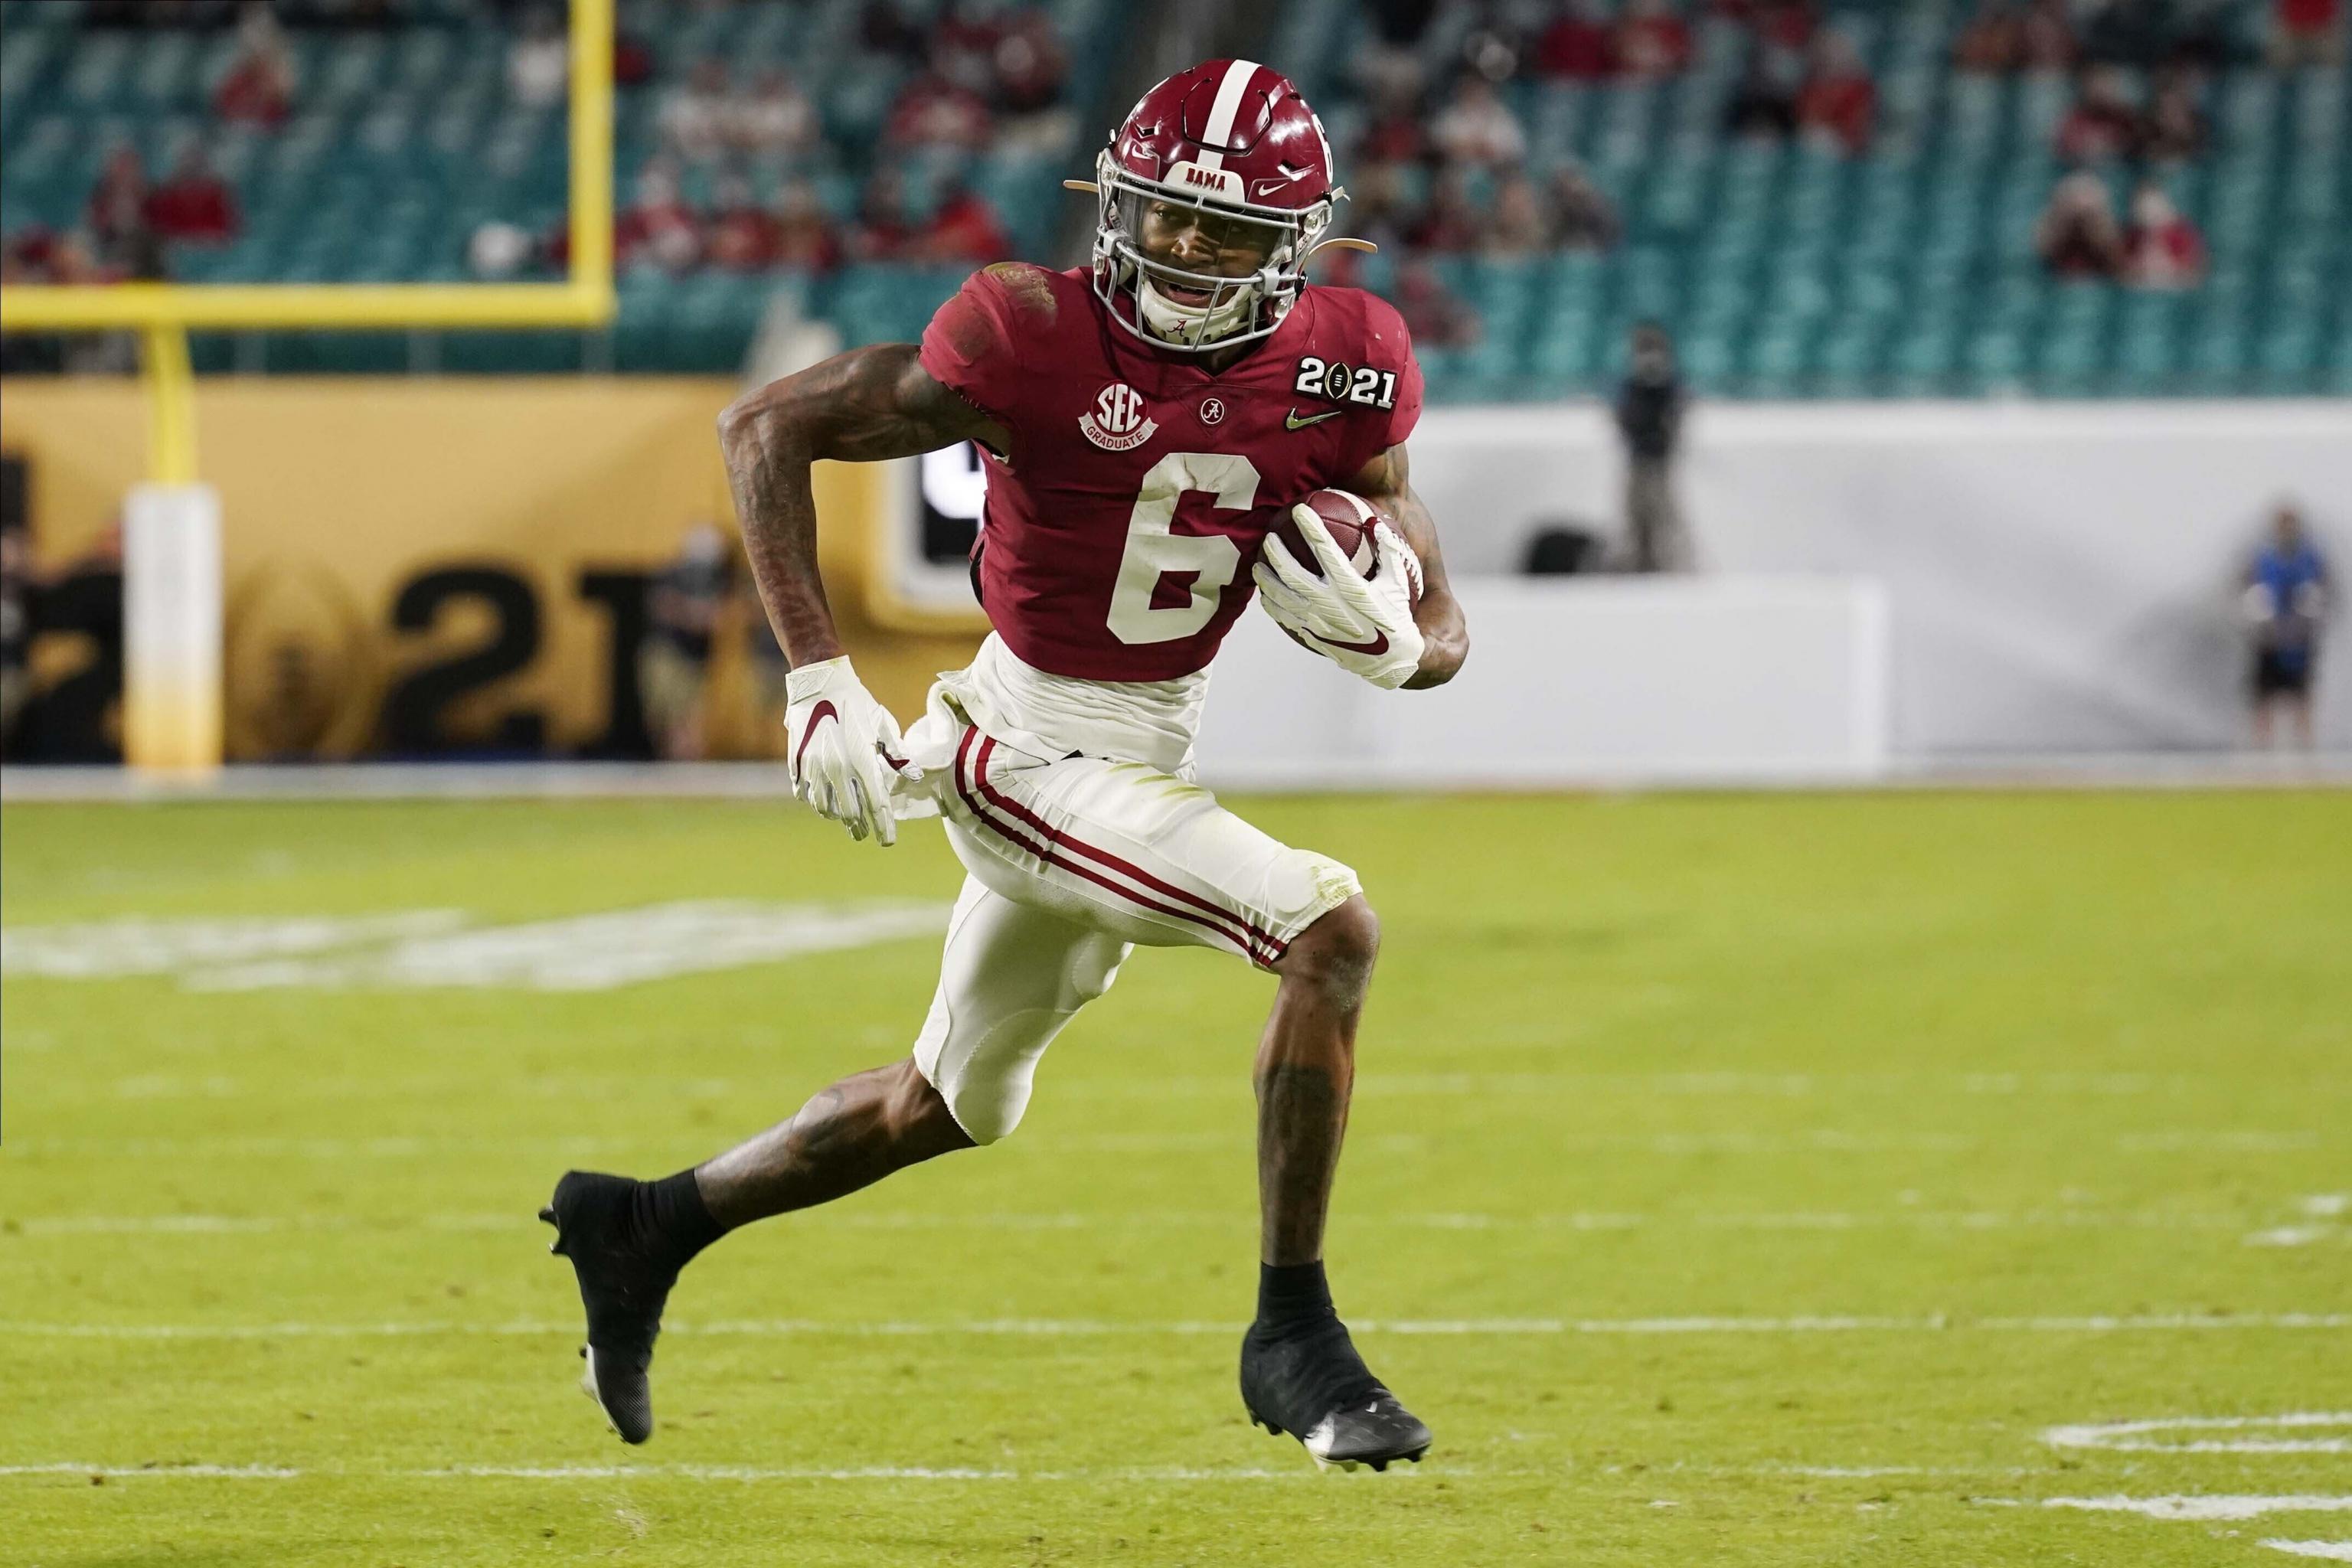 2021 NFL draft: Alabama WR Jaylen Waddle pegged as fit for Chargers